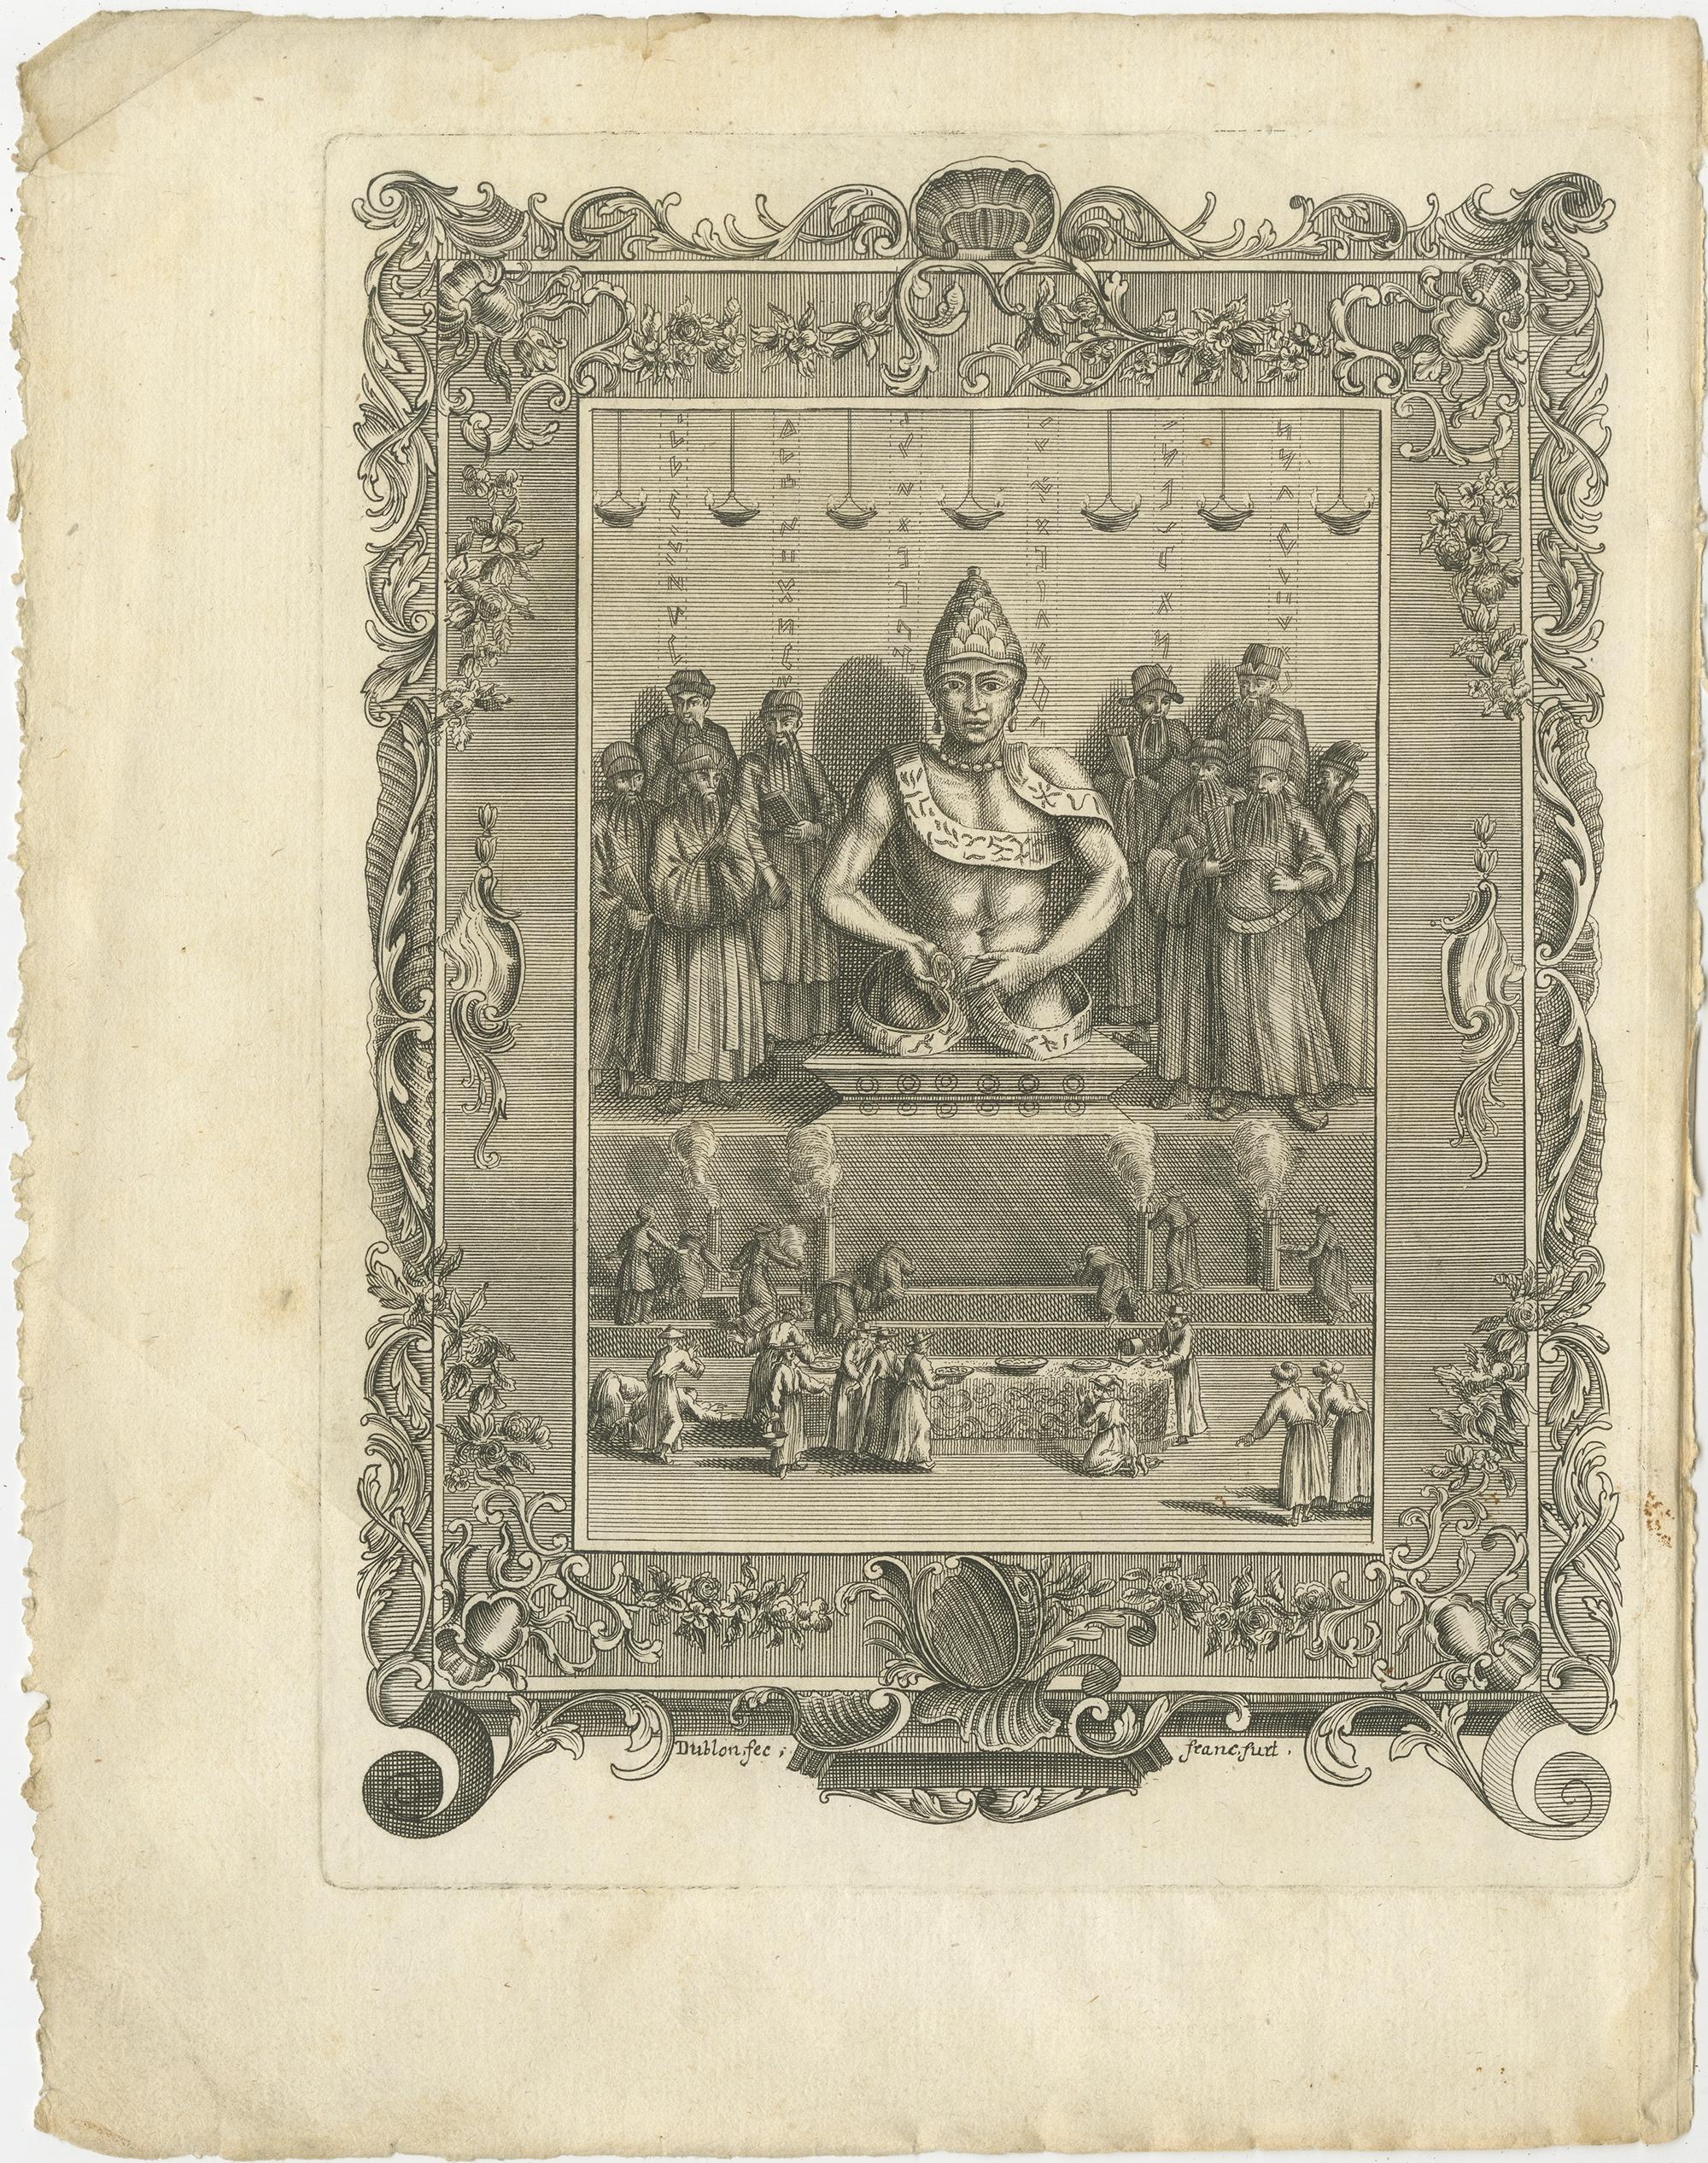 Antique frontispiece with religious figures. This print originates from volume 5 of '' New collection of the strangest travel stories, especially the most trusted news from the countries and peoples of the whole world '', 1752.

Artists and